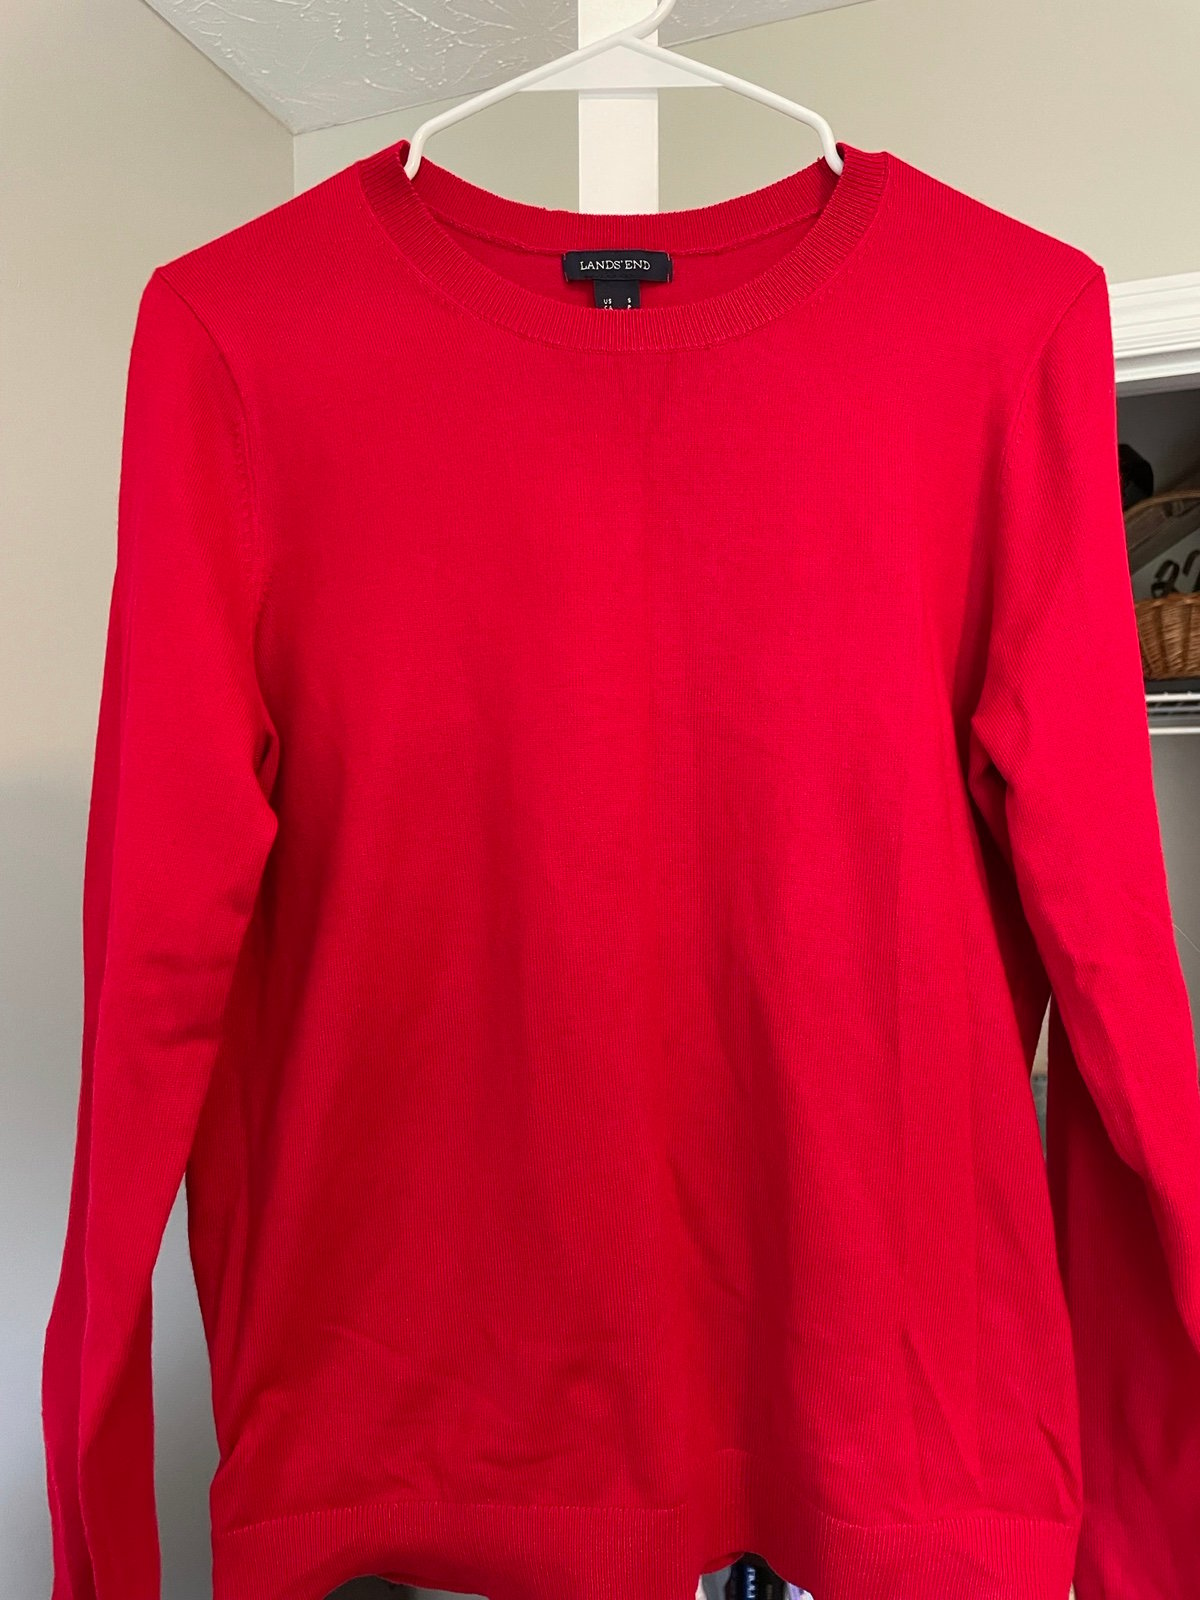 high discount Lands End Red Sweater Womens PLnBYOBQr Everyday Low Prices